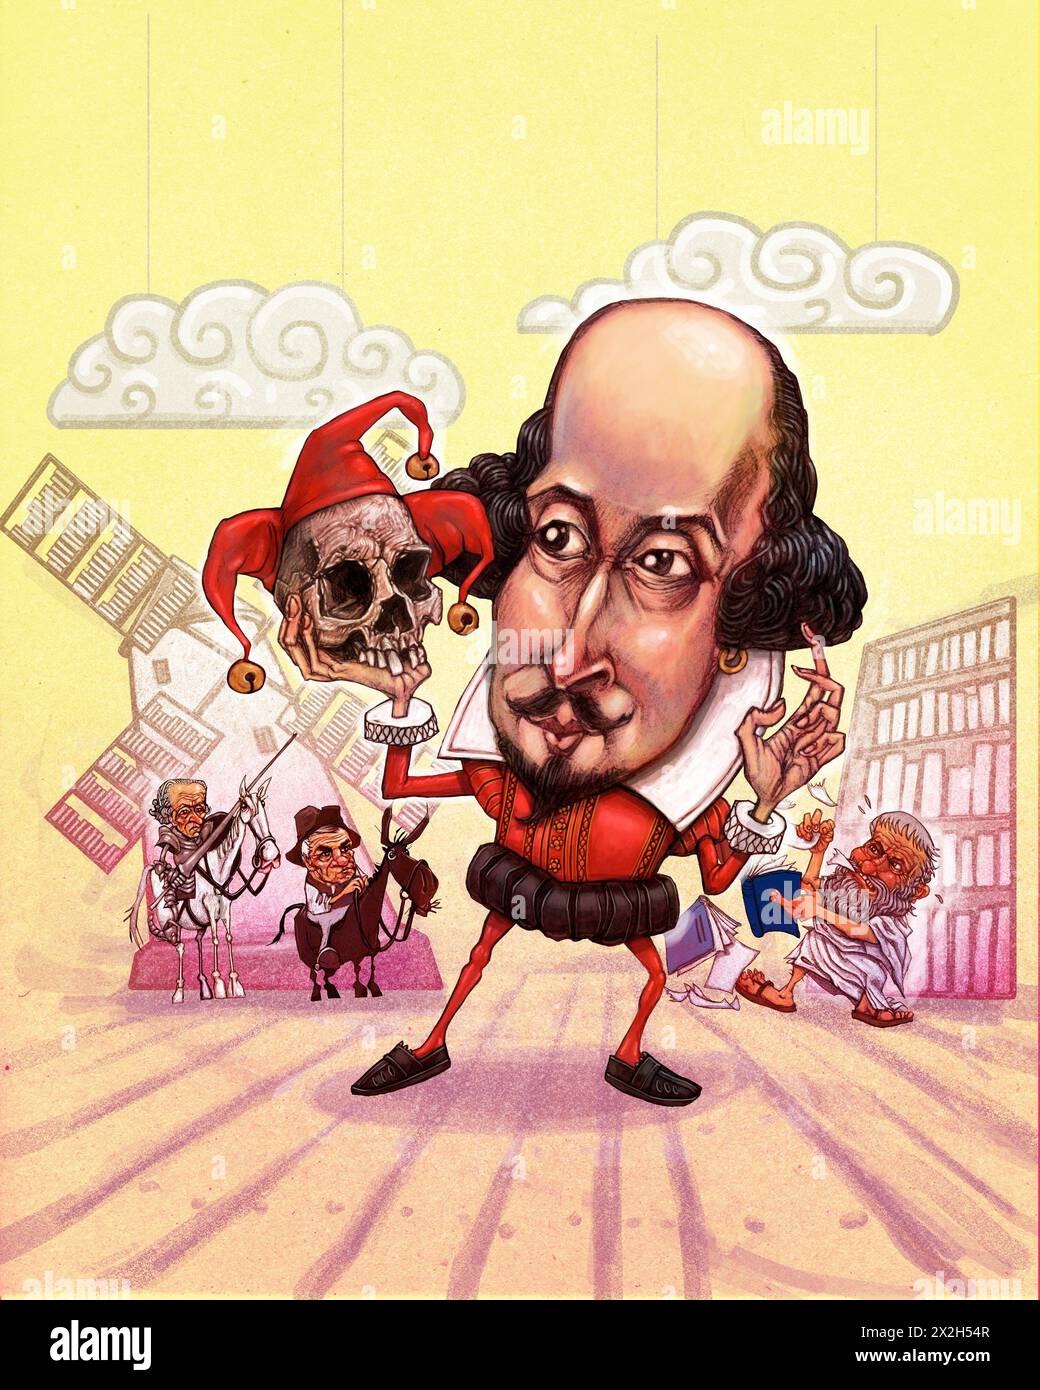 Concept art illustrating the philosophy of literature with Shakespeare, Plato, tearing up books, Kant as Don Quixote and Milan Kundera as Sancho Panza Stock Photo